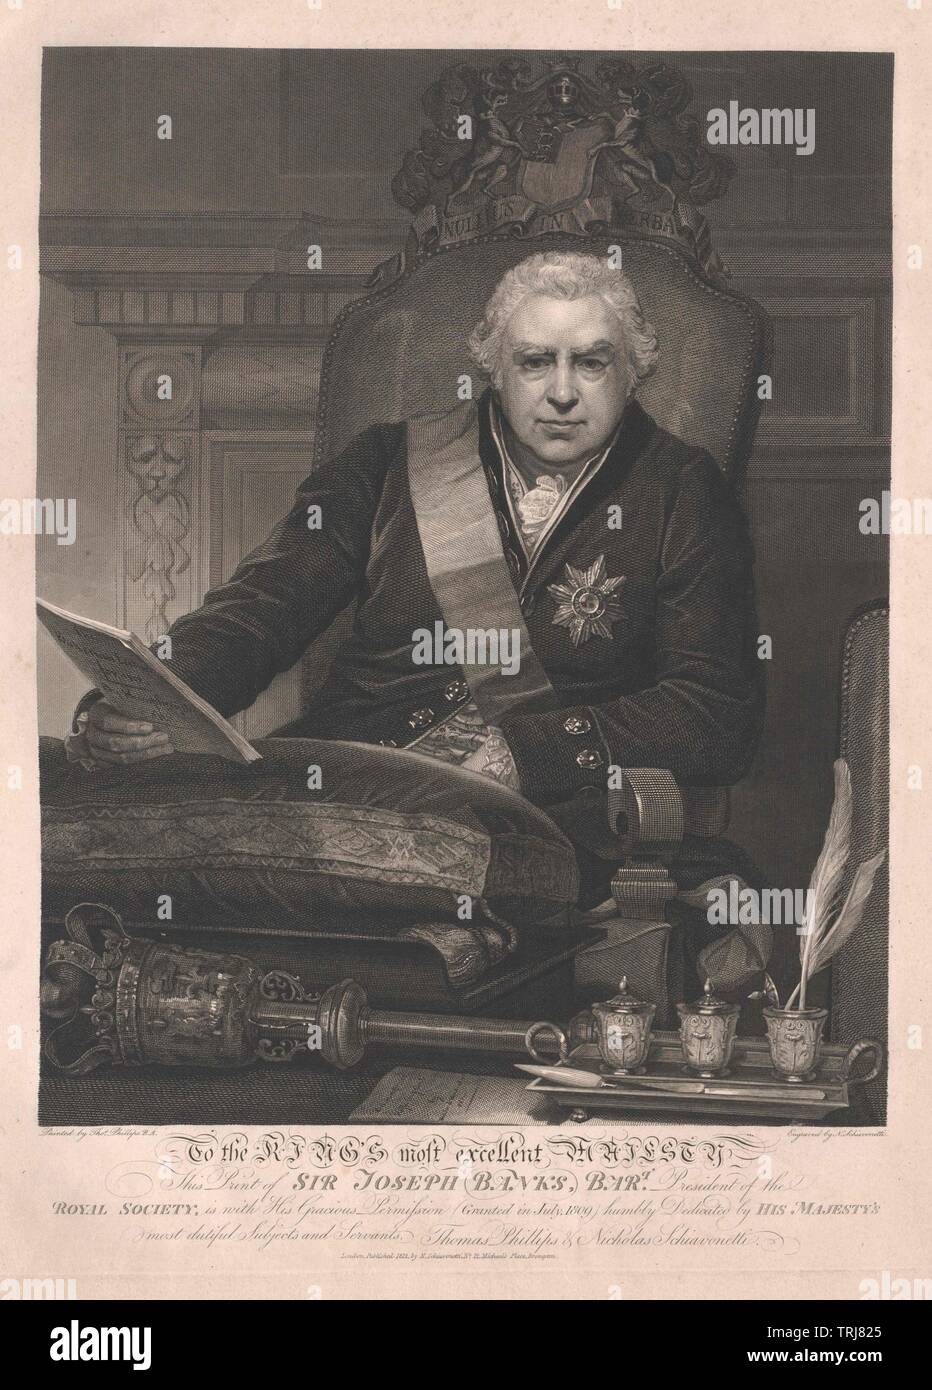 Banks, Joseph baronet, English natural scientist and explorer, president of the Royal society 1778, baronet 1781, Additional-Rights-Clearance-Info-Not-Available Stock Photo